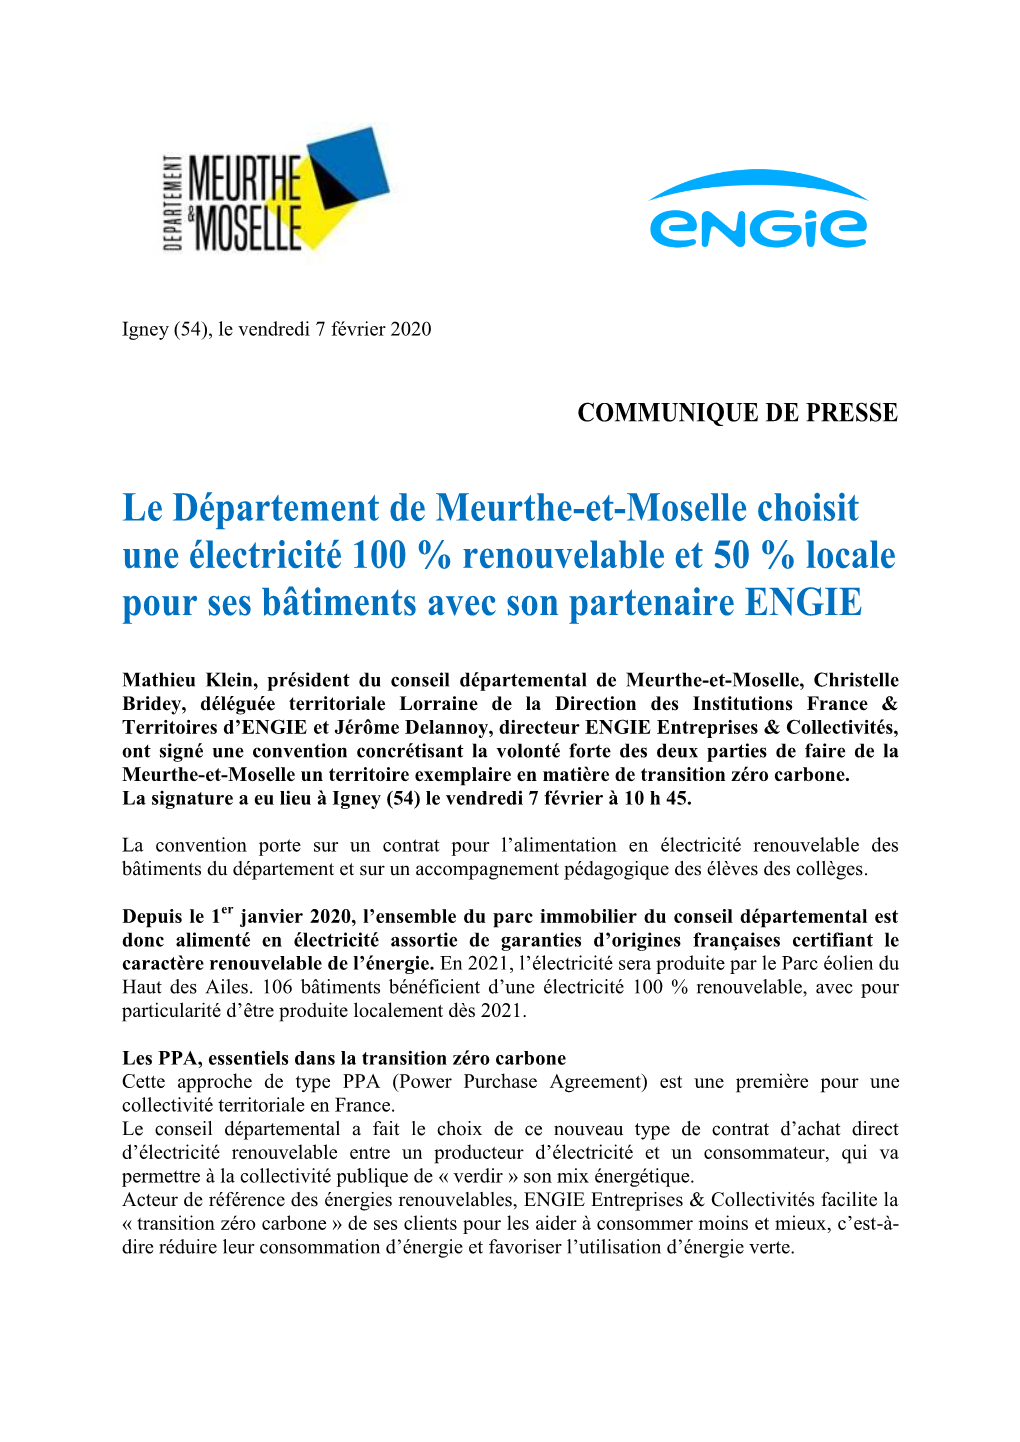 2020-02-07 CP Convention Engie